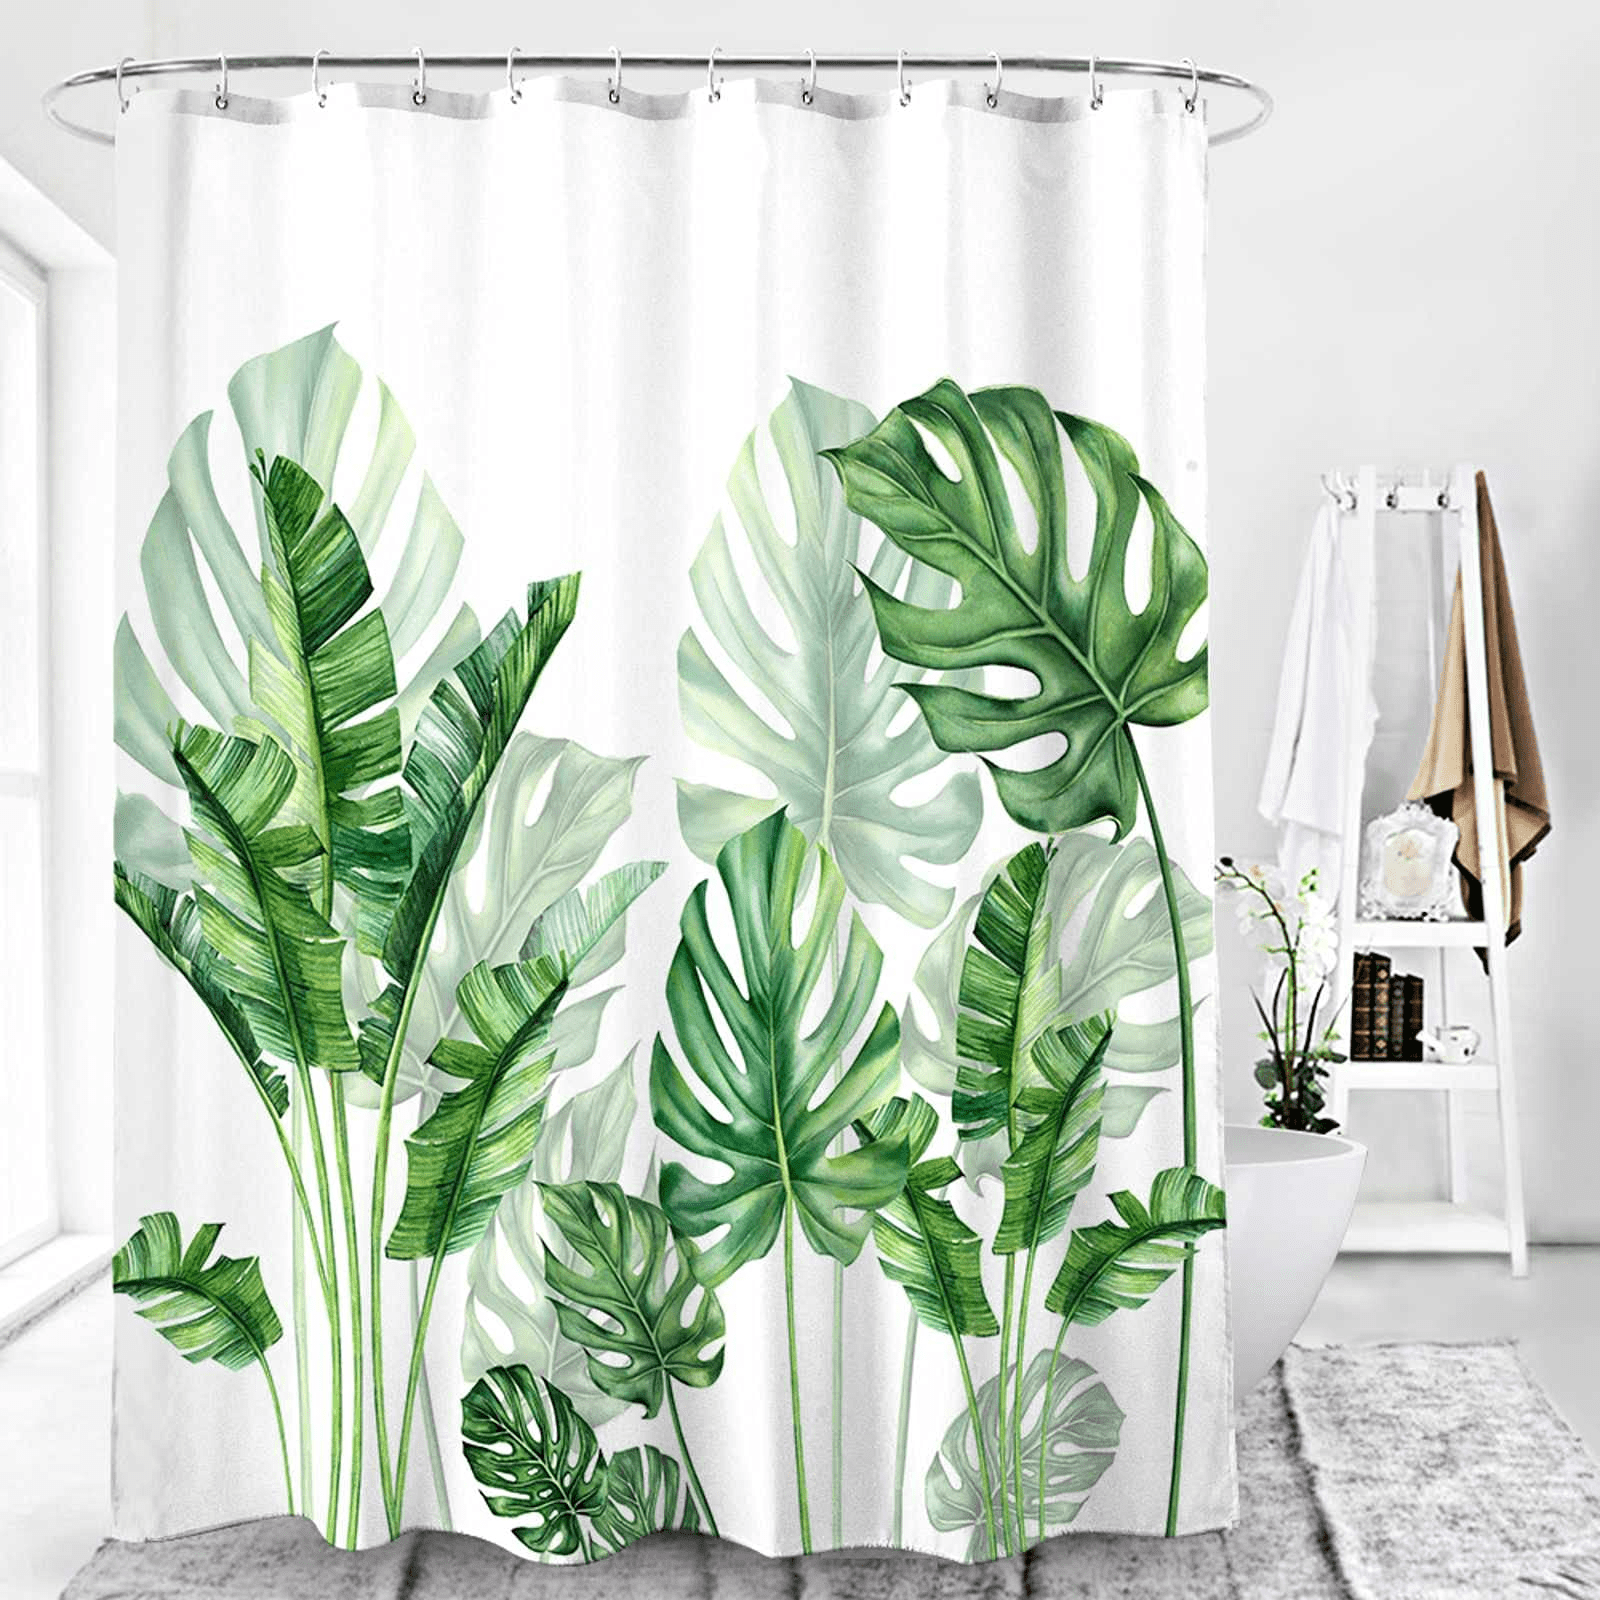 Tropical Leaves Waterproof Polyester Bathroom Shower Curtain With Free 12 Hooks 